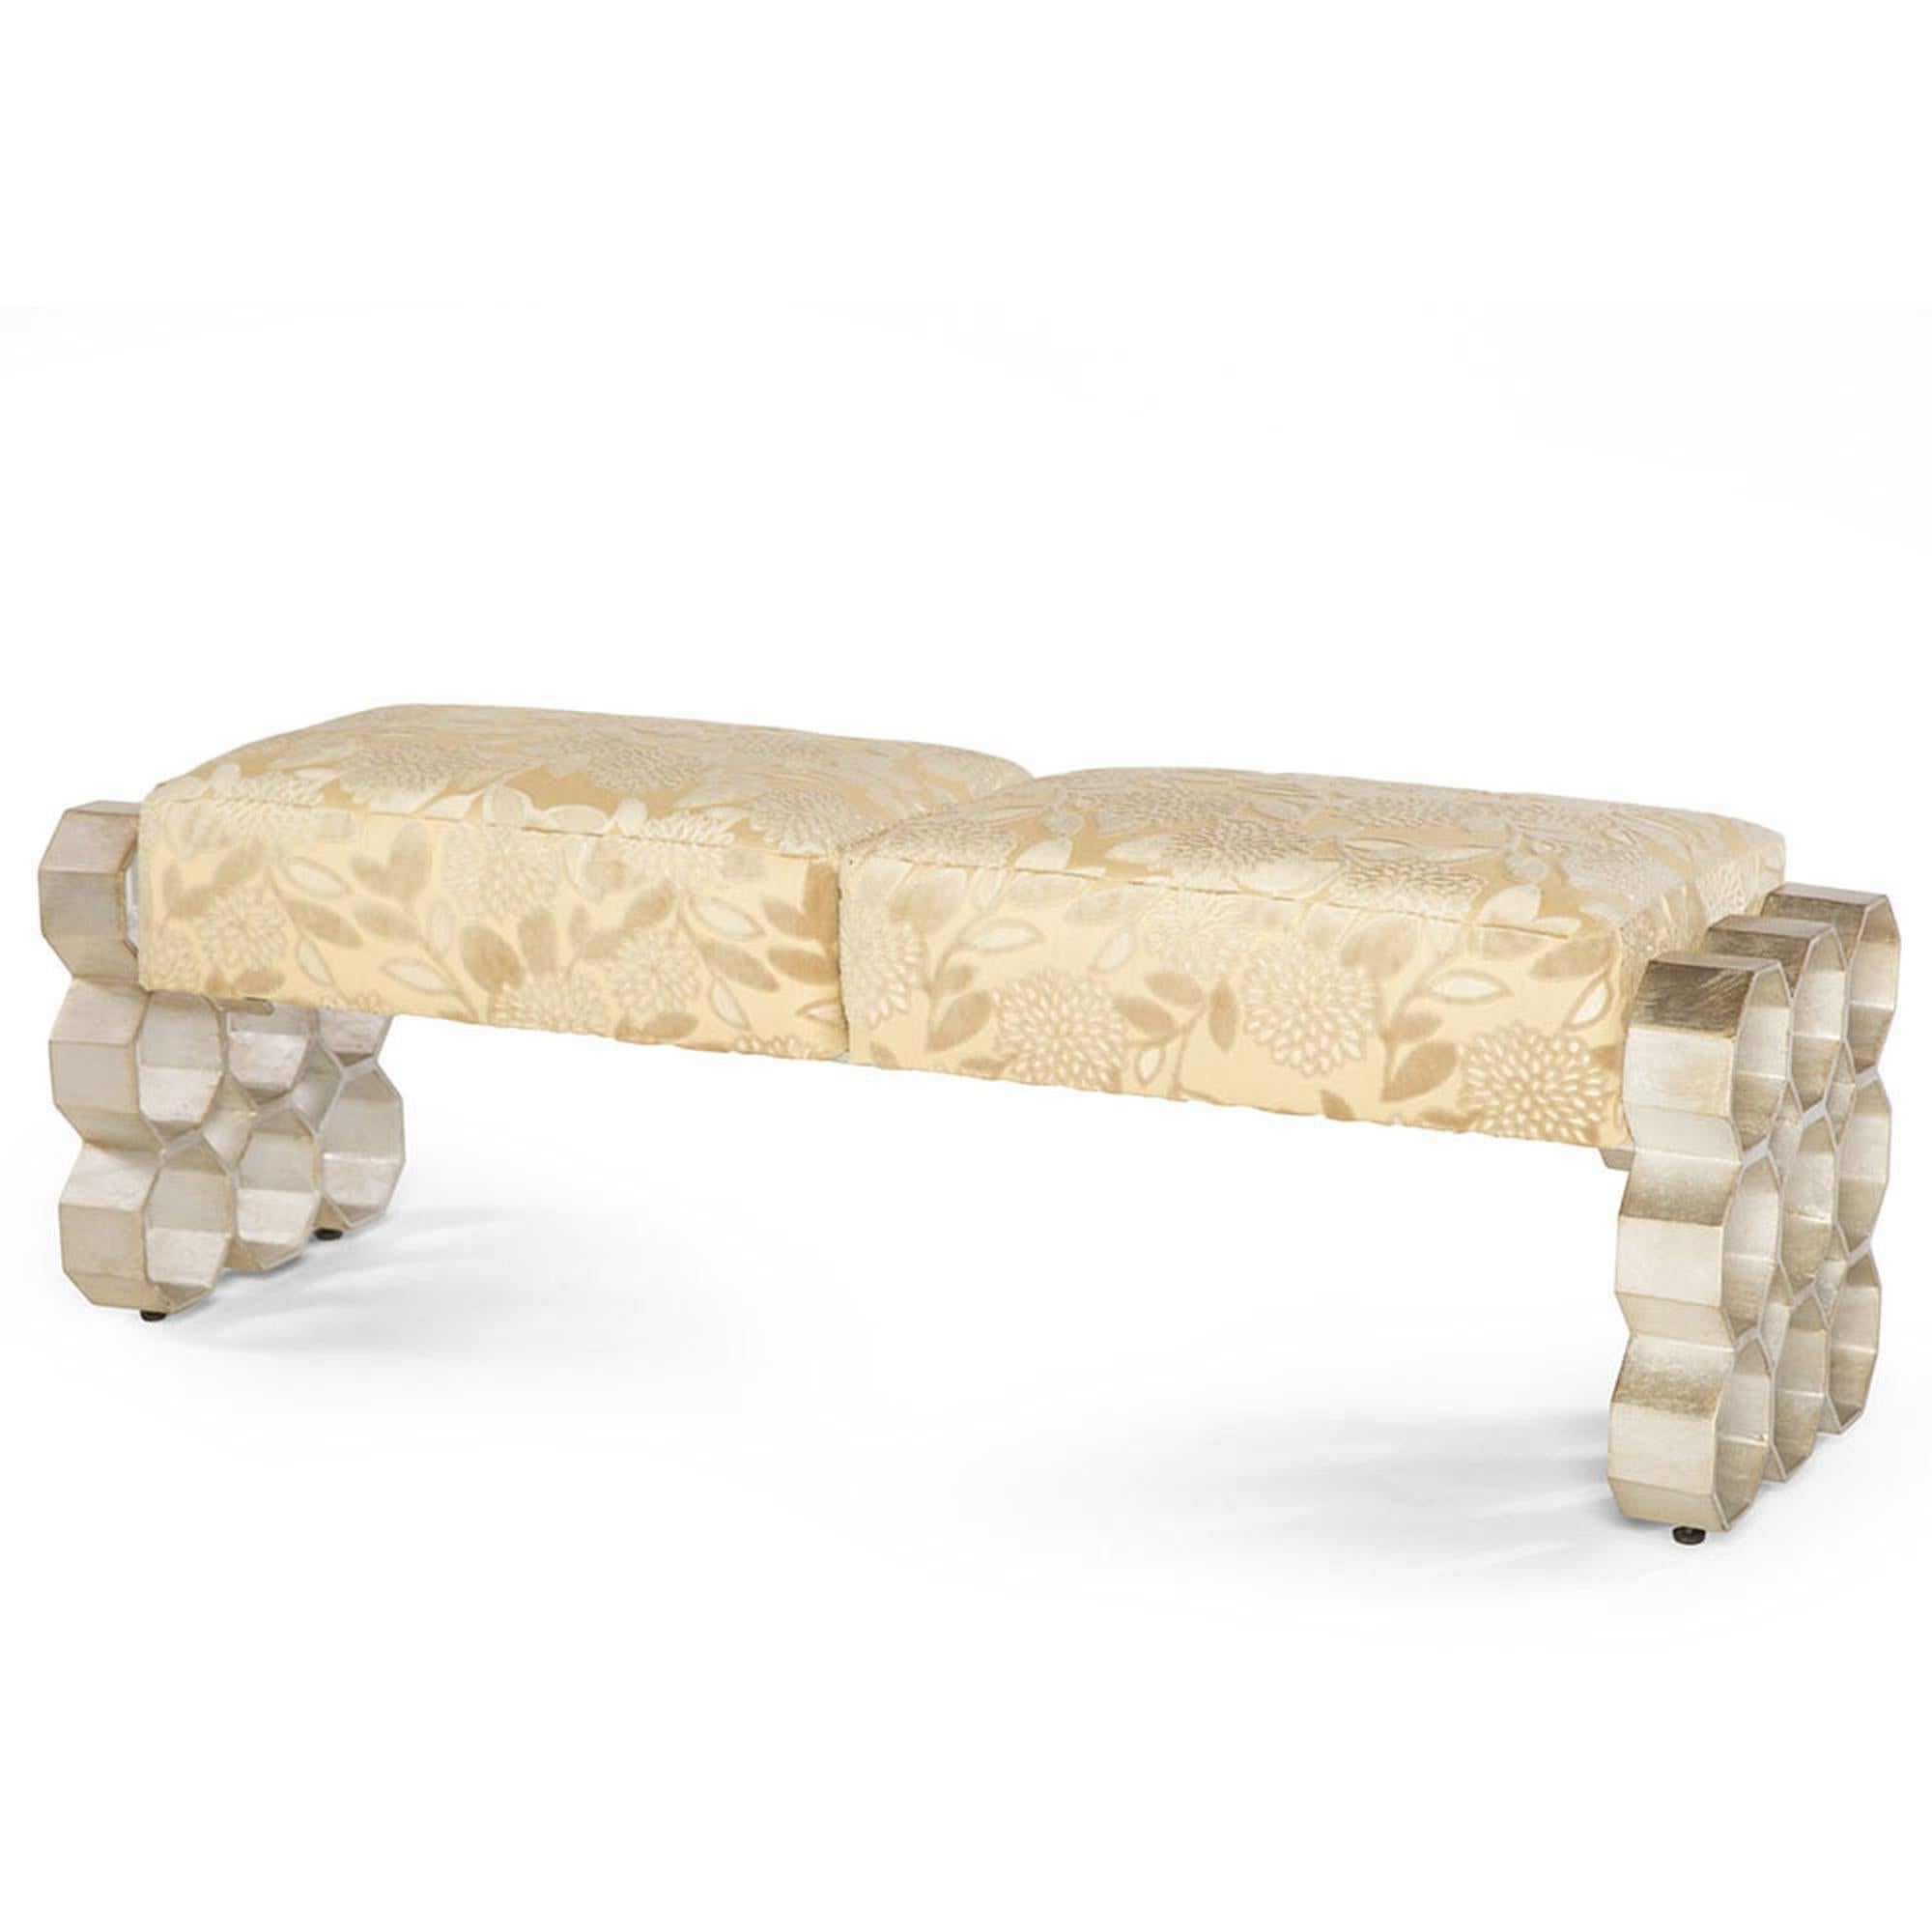 The Crawford bed bench is a unique, glamorous, and sophisticated accent piece. With two metal legs that feature an octagonal repeat design, and tightly upholstered seat, this bench is as beautiful as it is functional. On its own, each design element